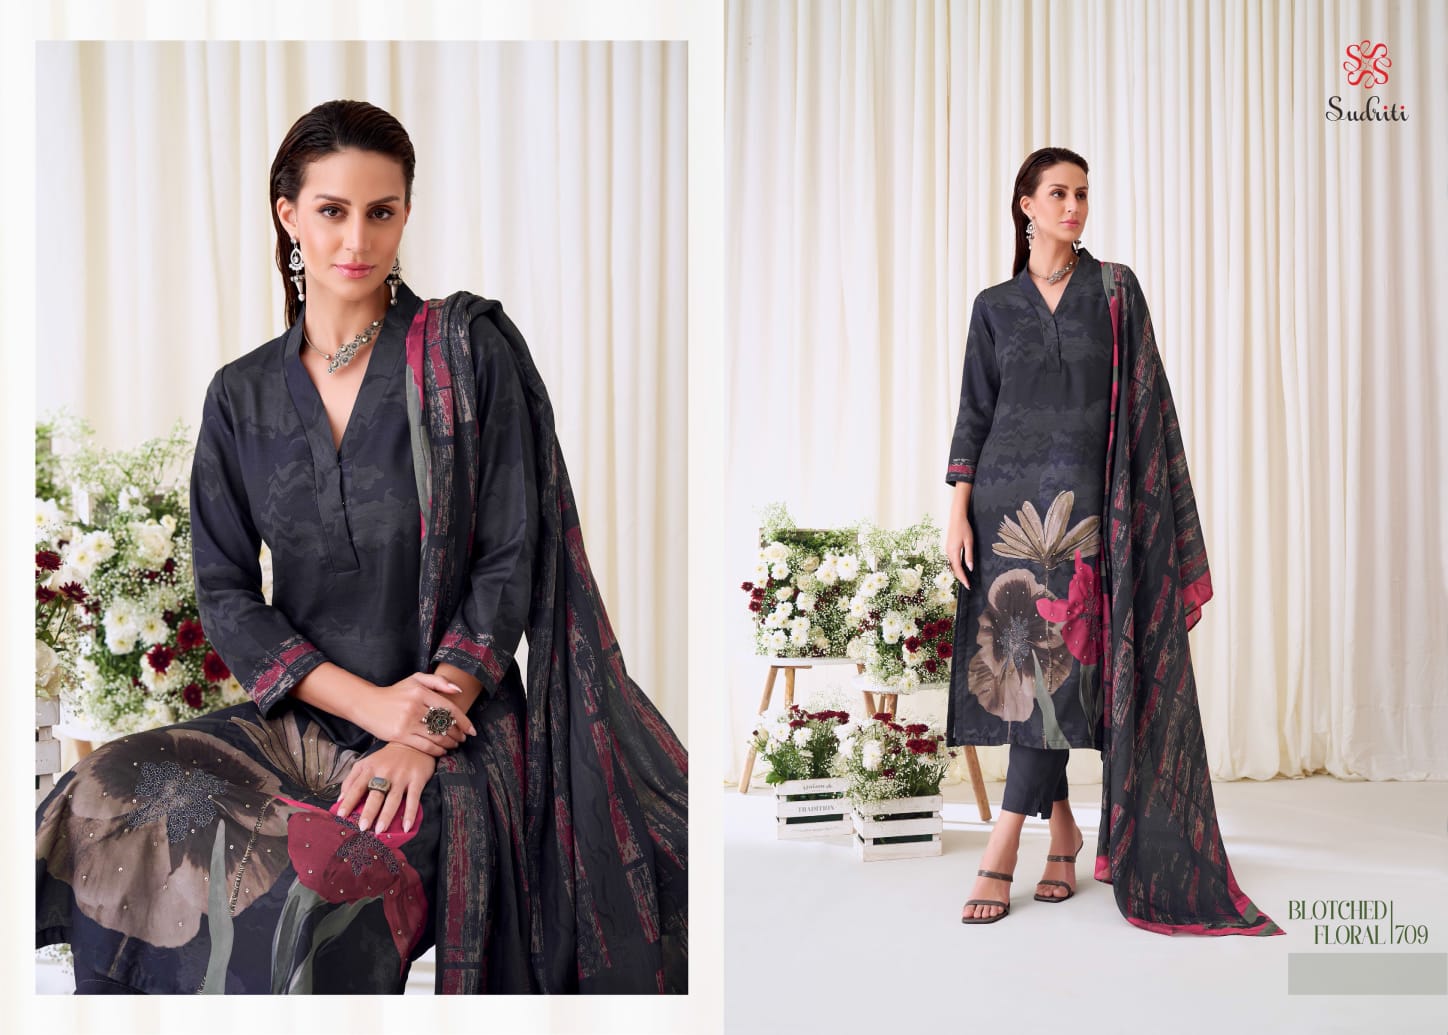 Sudriti Blotched Floral collection 3